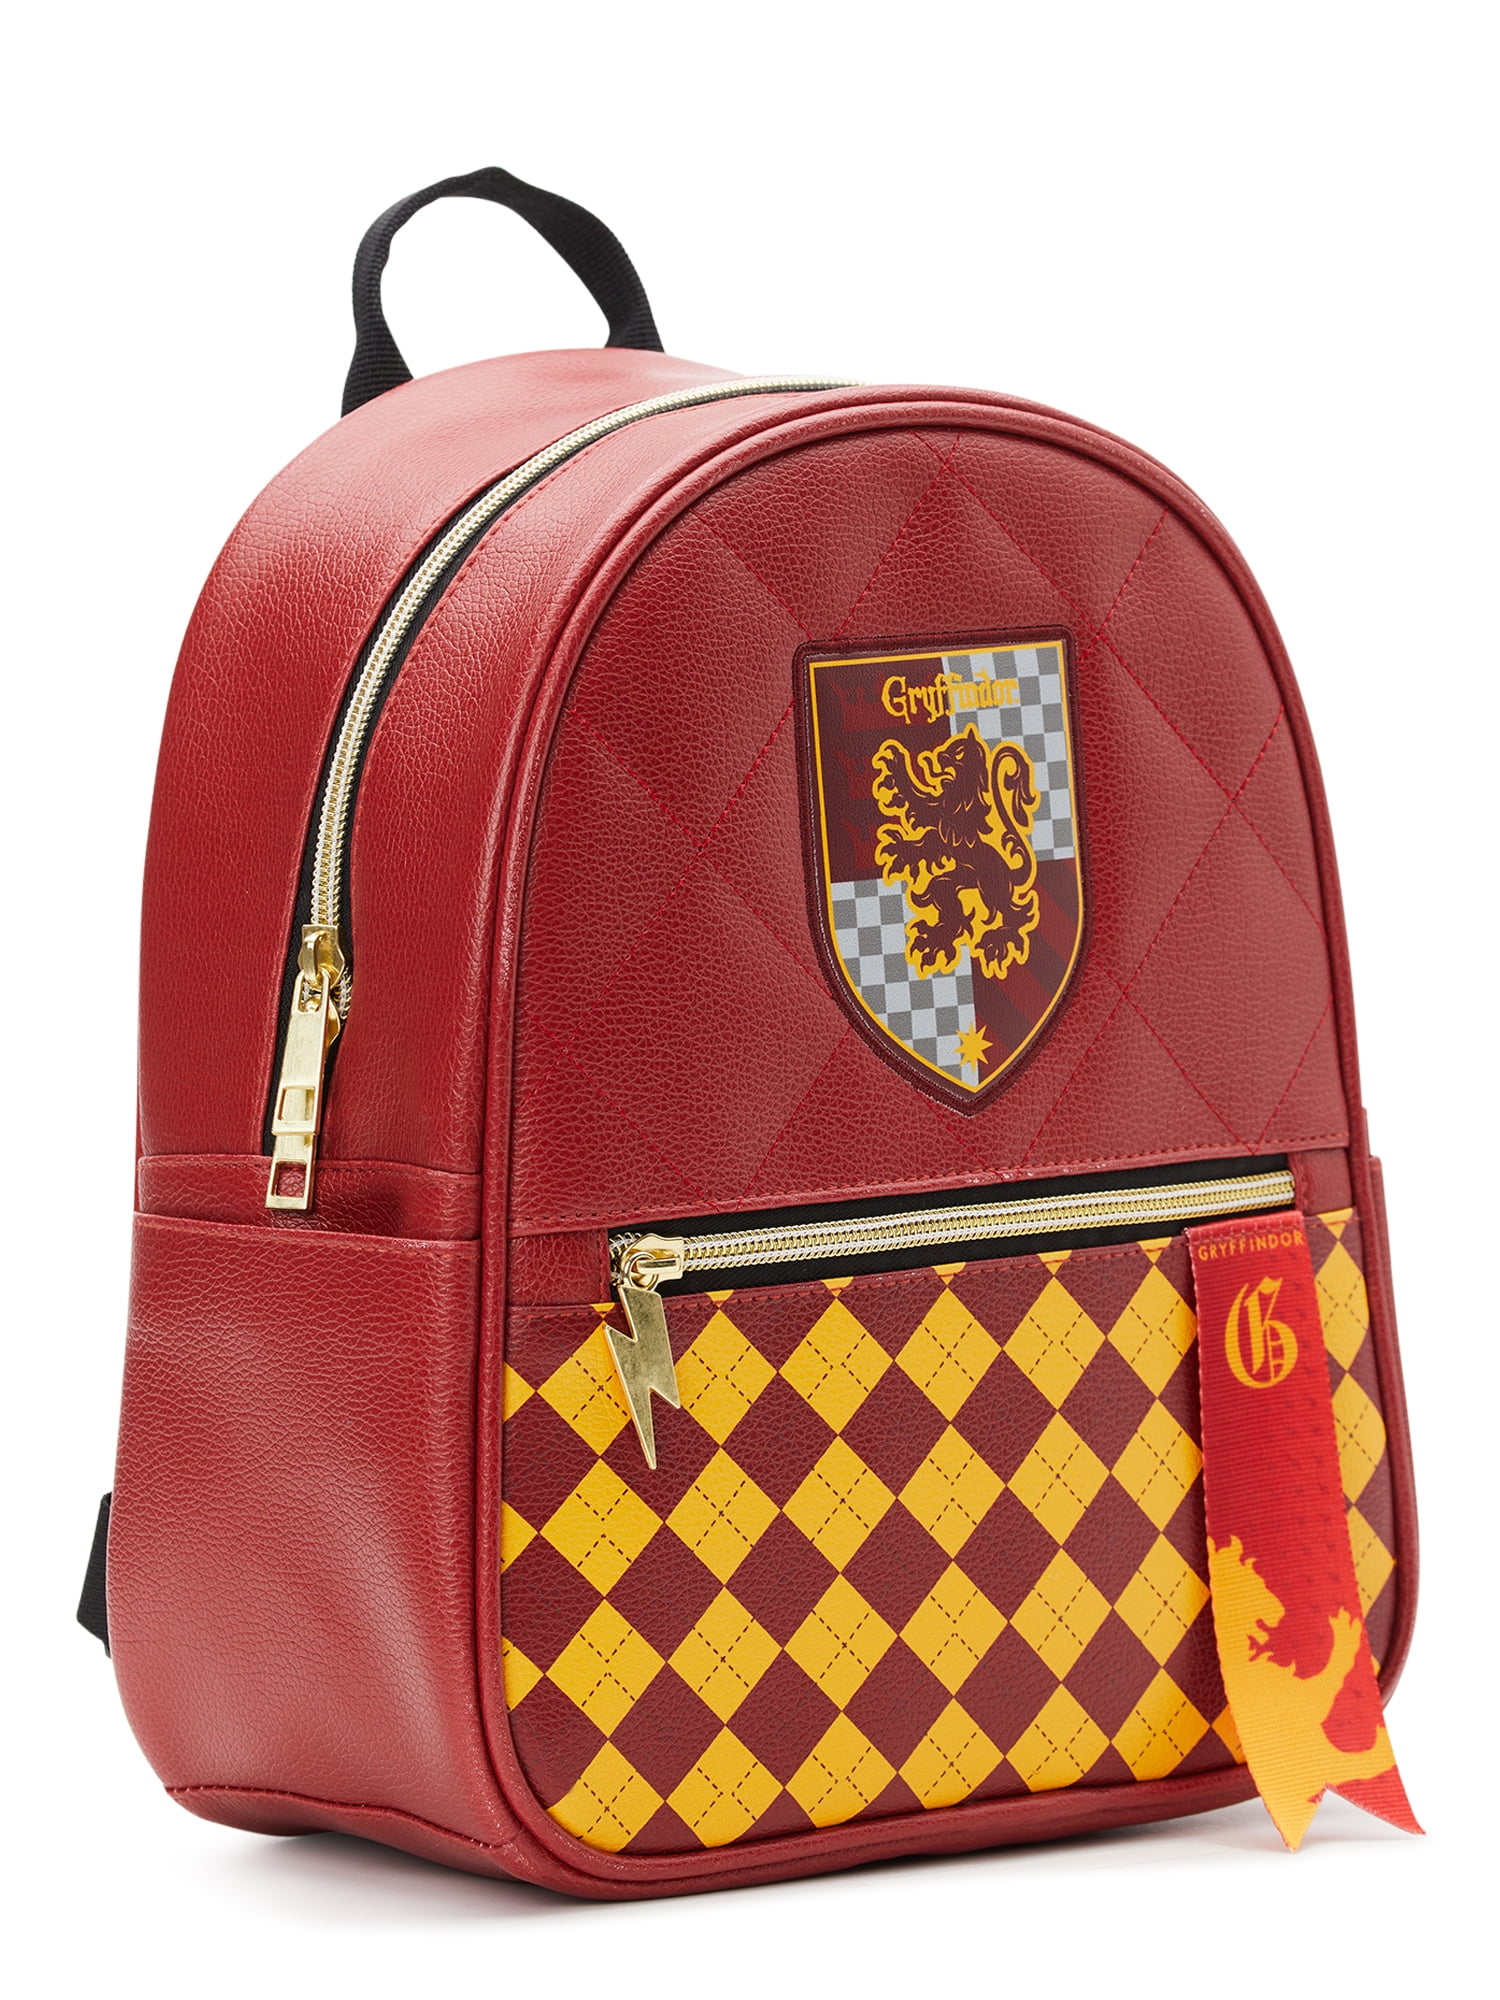 Harry Potter Diagon Alley Owl Backpack Bag Loungefly Exclusive –  www.scifi-toys.com